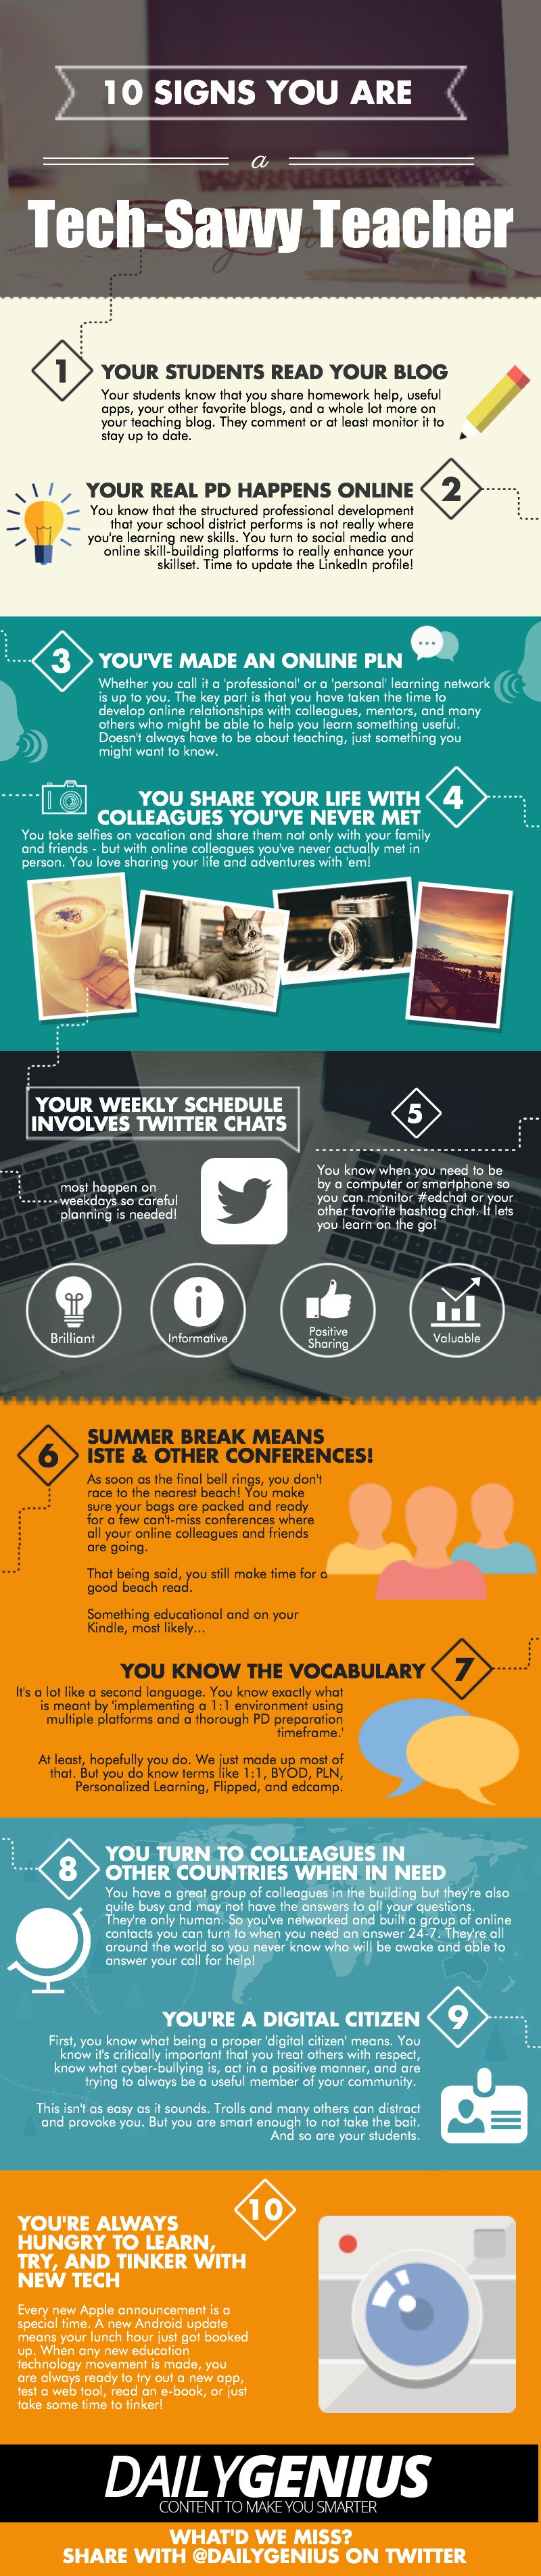 10 Signs You Are a Tech-Savvy Teacher Infographic